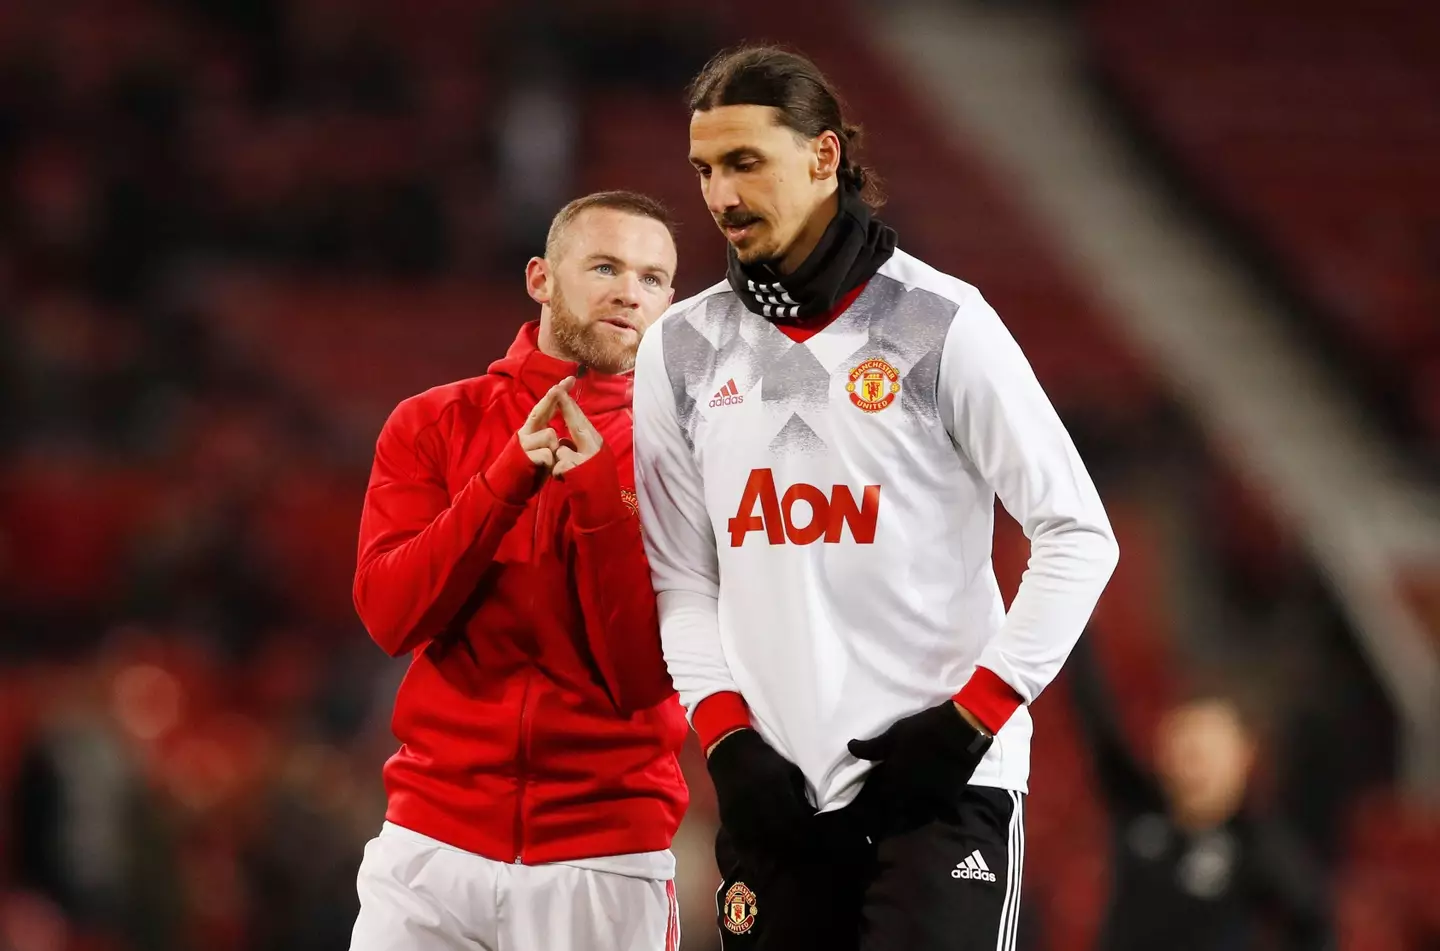 Ibrahimovic and Rooney during their time together at Old Trafford. (Image